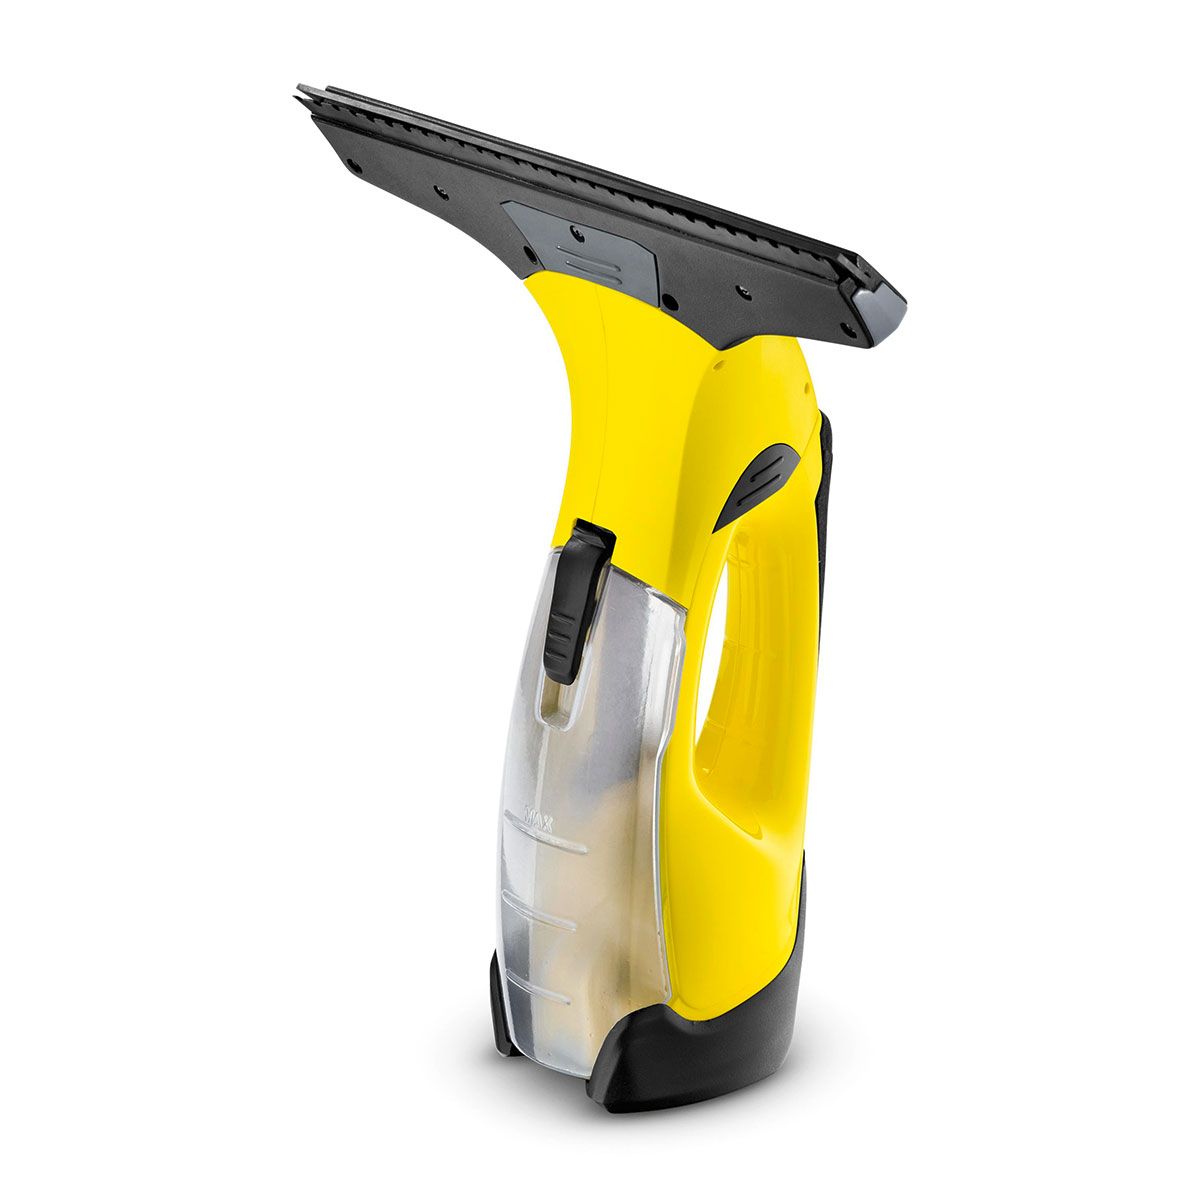 Karcher WV5 Window Vac Demo And Review Of Window Cleaning Vacuum Cleaner 